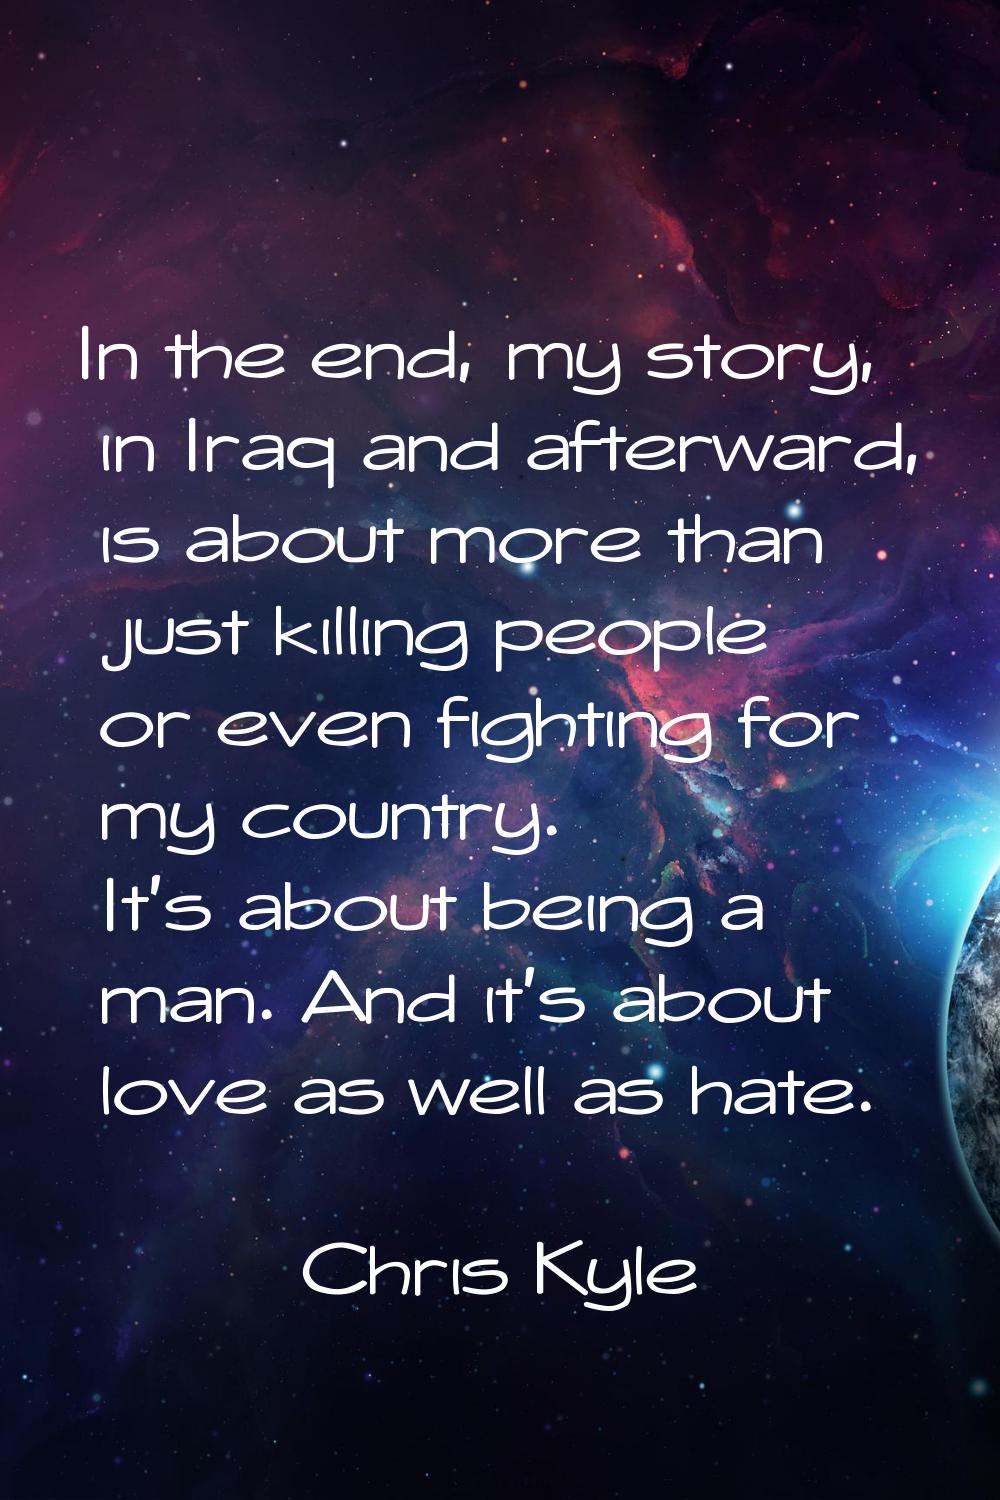 In the end, my story, in Iraq and afterward, is about more than just killing people or even fightin